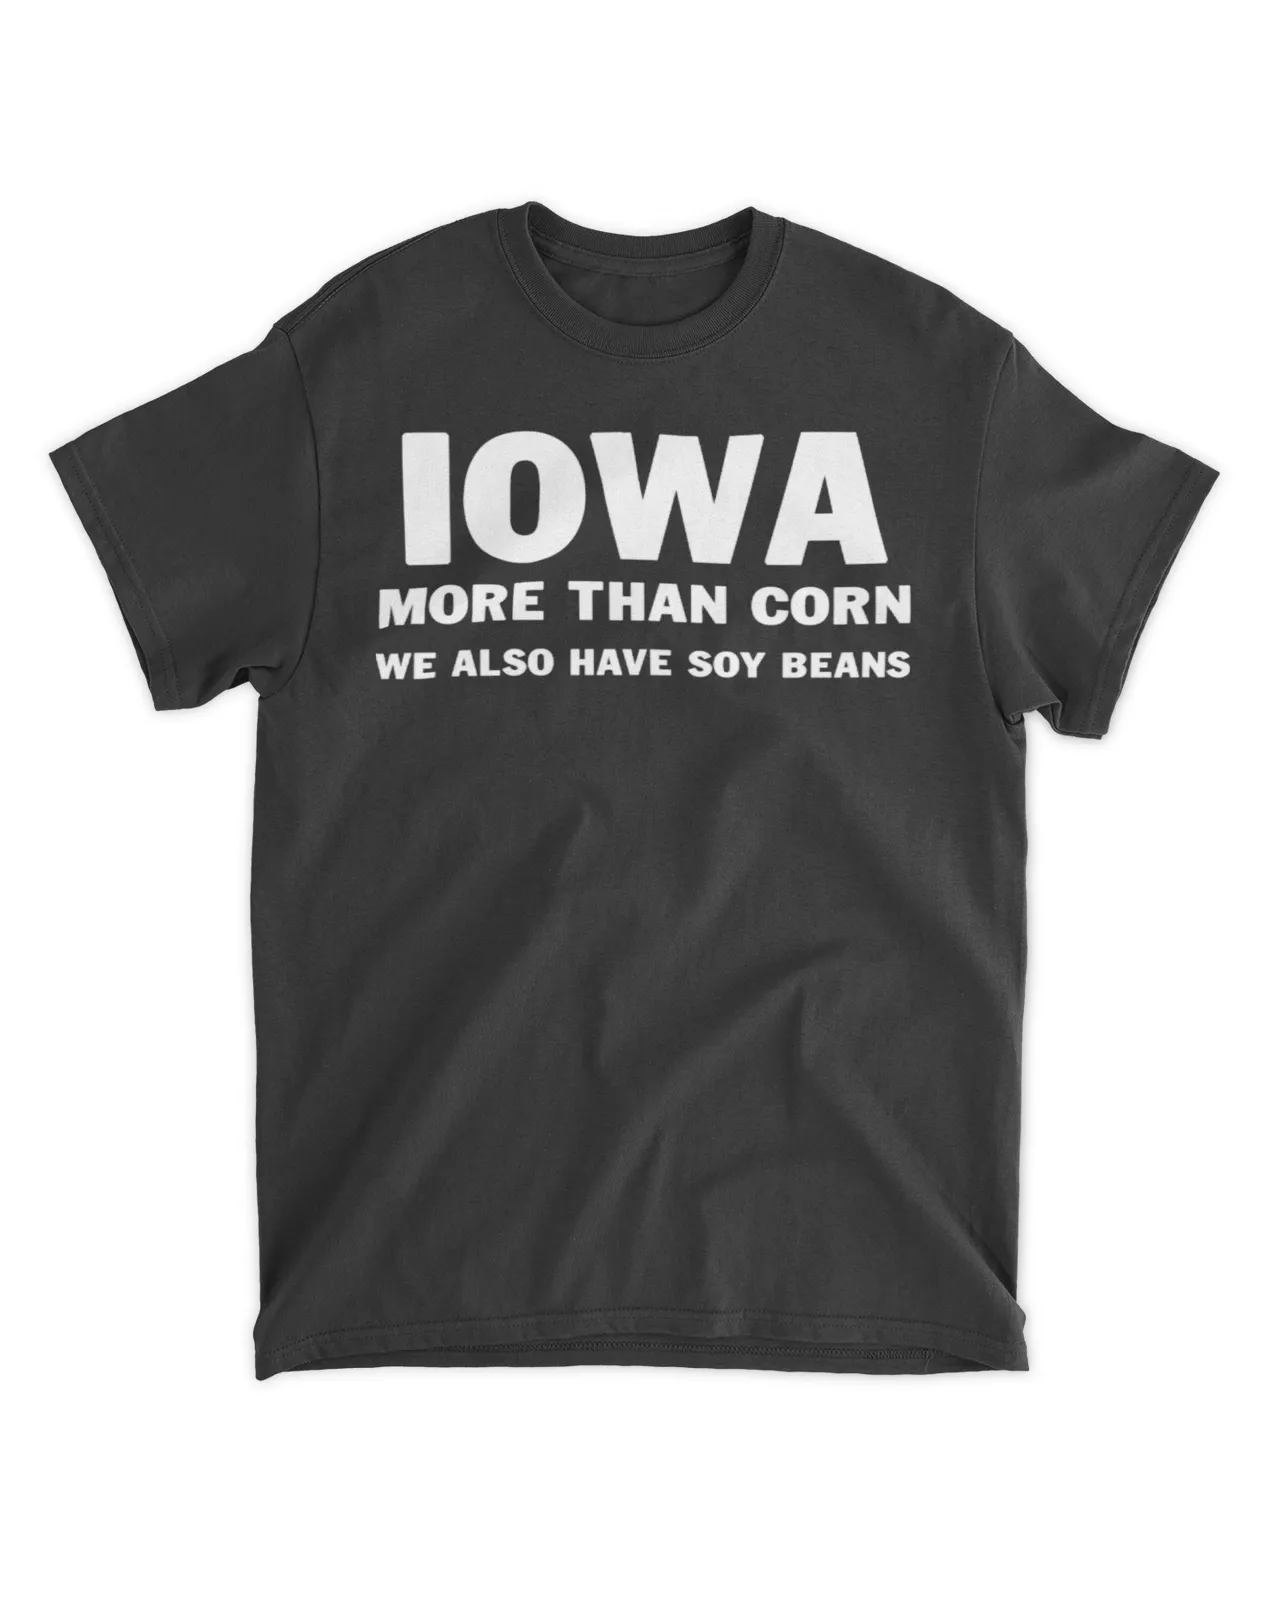  IOWA more than corn we also have soy beans shirt